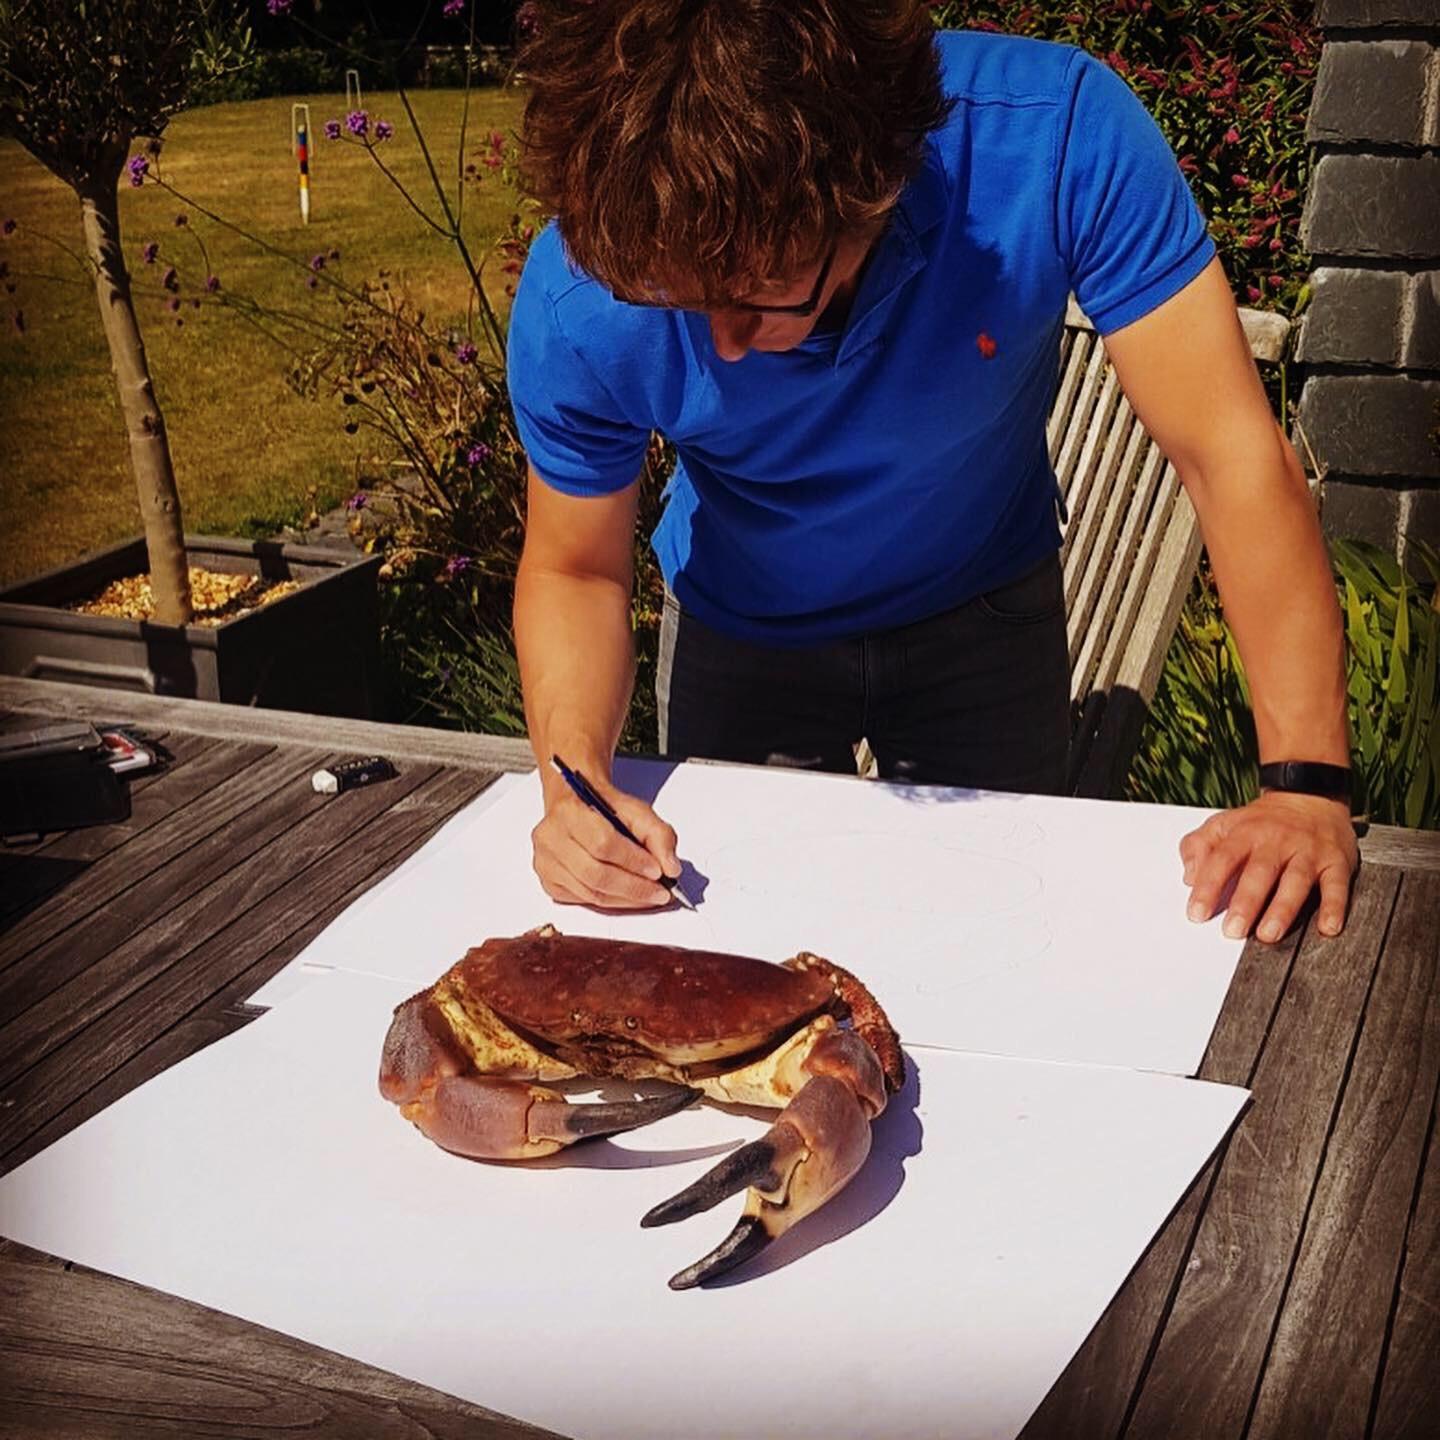 Glazed Hercules the Crab 'a Life-Sized Crab, Drawn and Released by Tom Rooth' For Sale